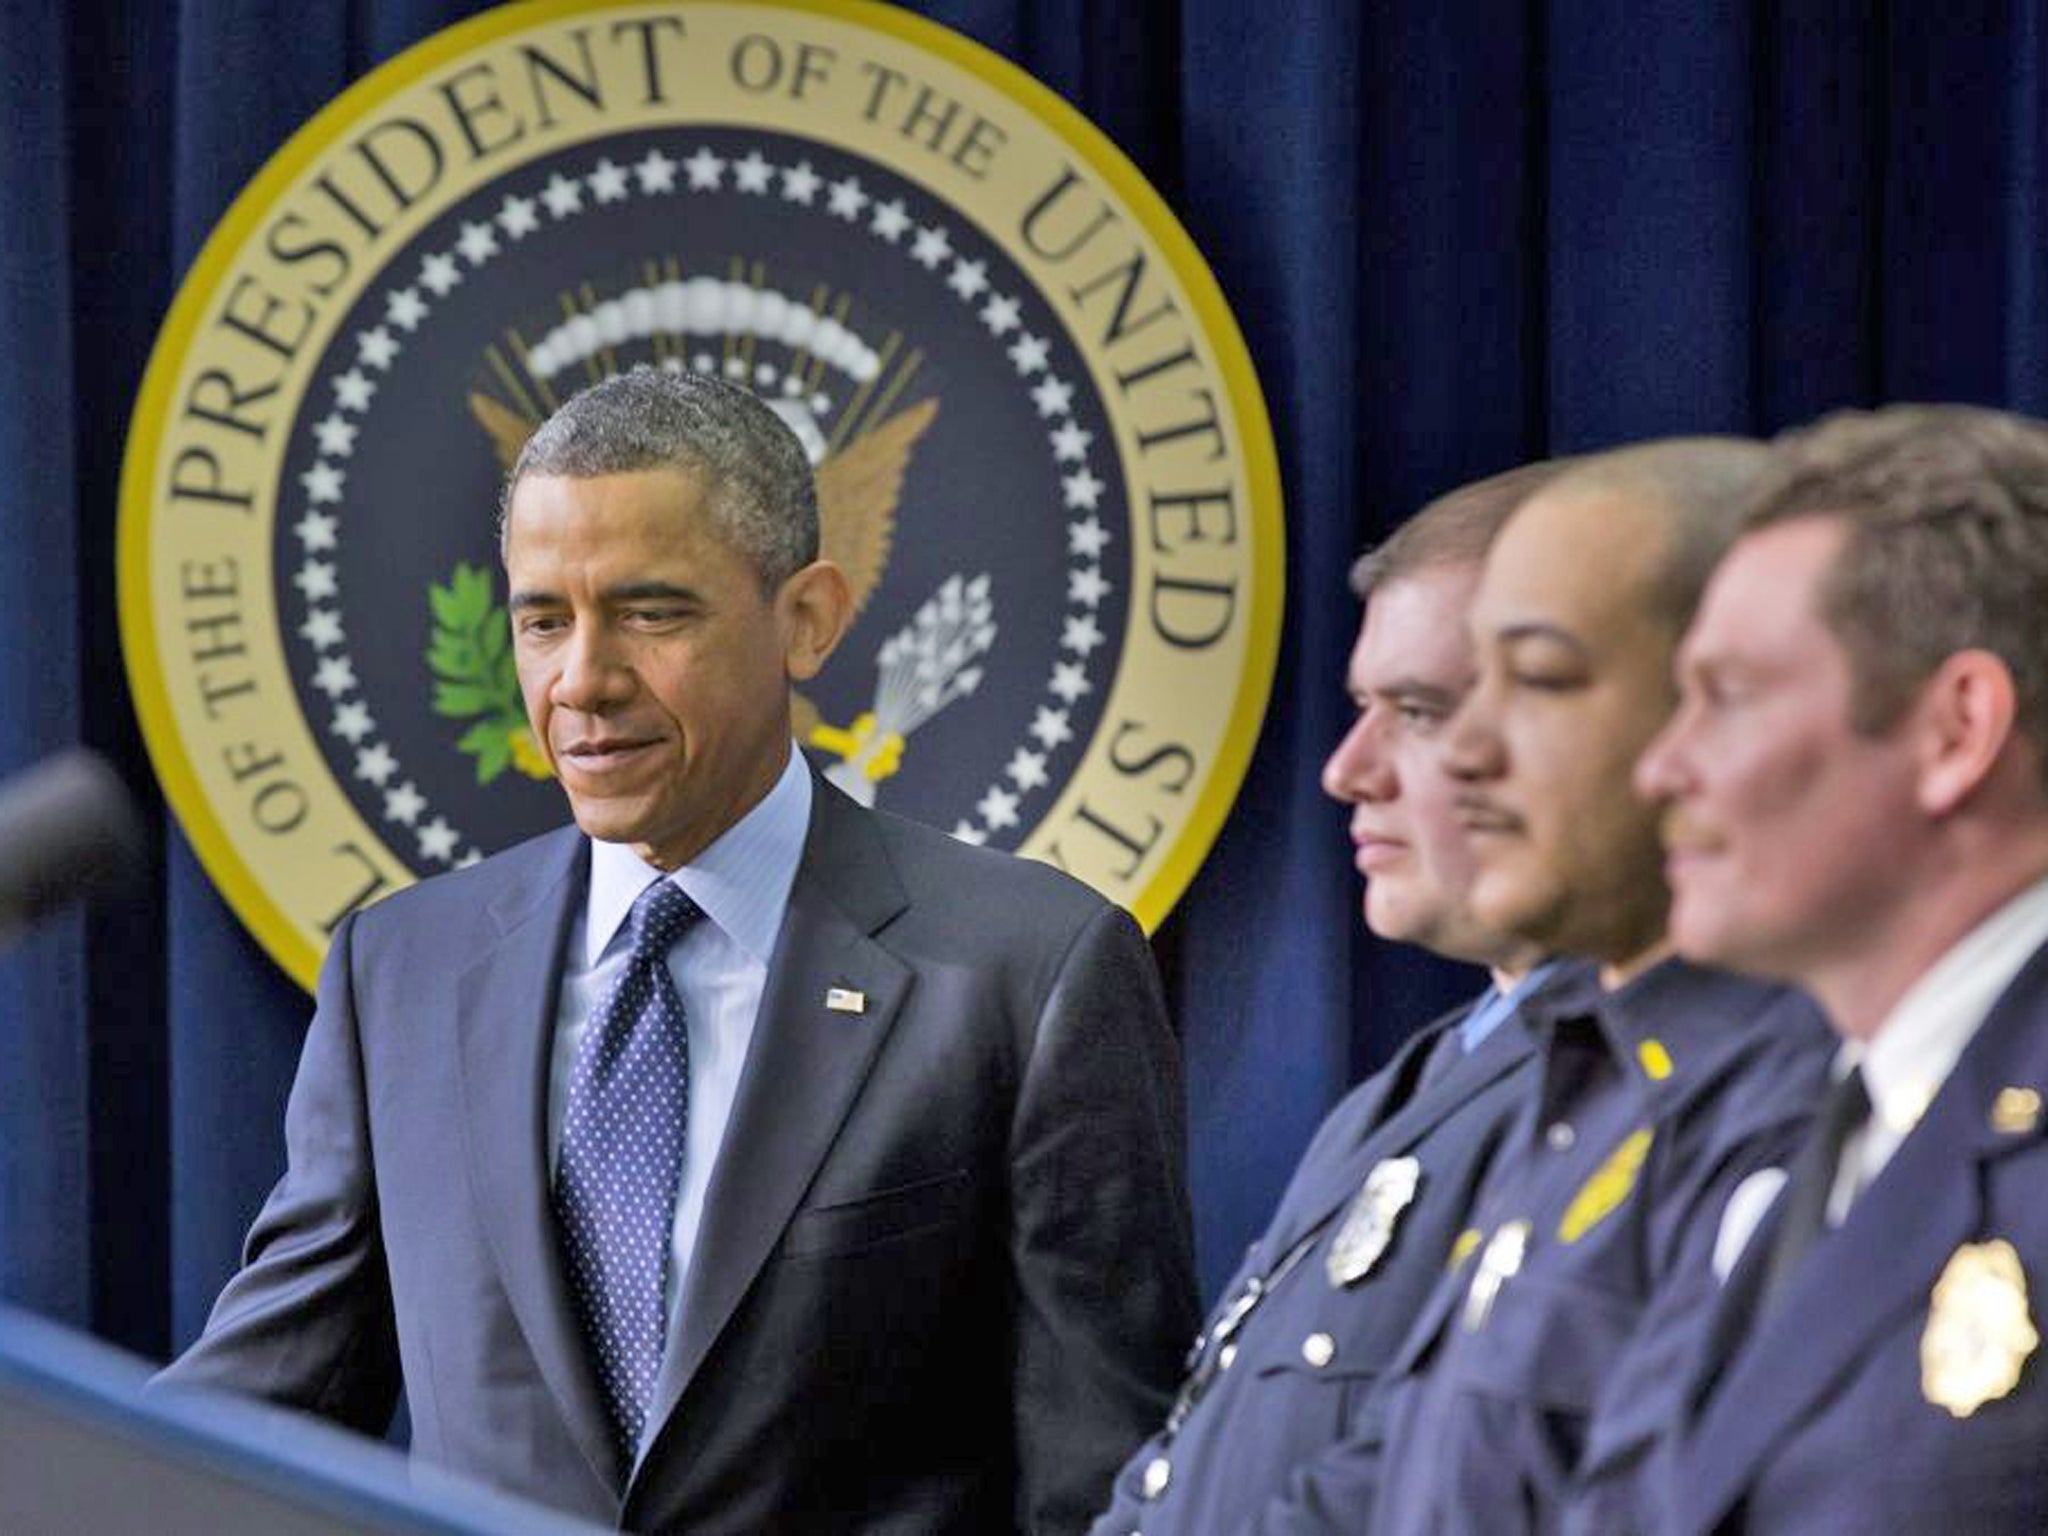 Barack Obama with emergency responders urges Congressional action to stop spending cuts